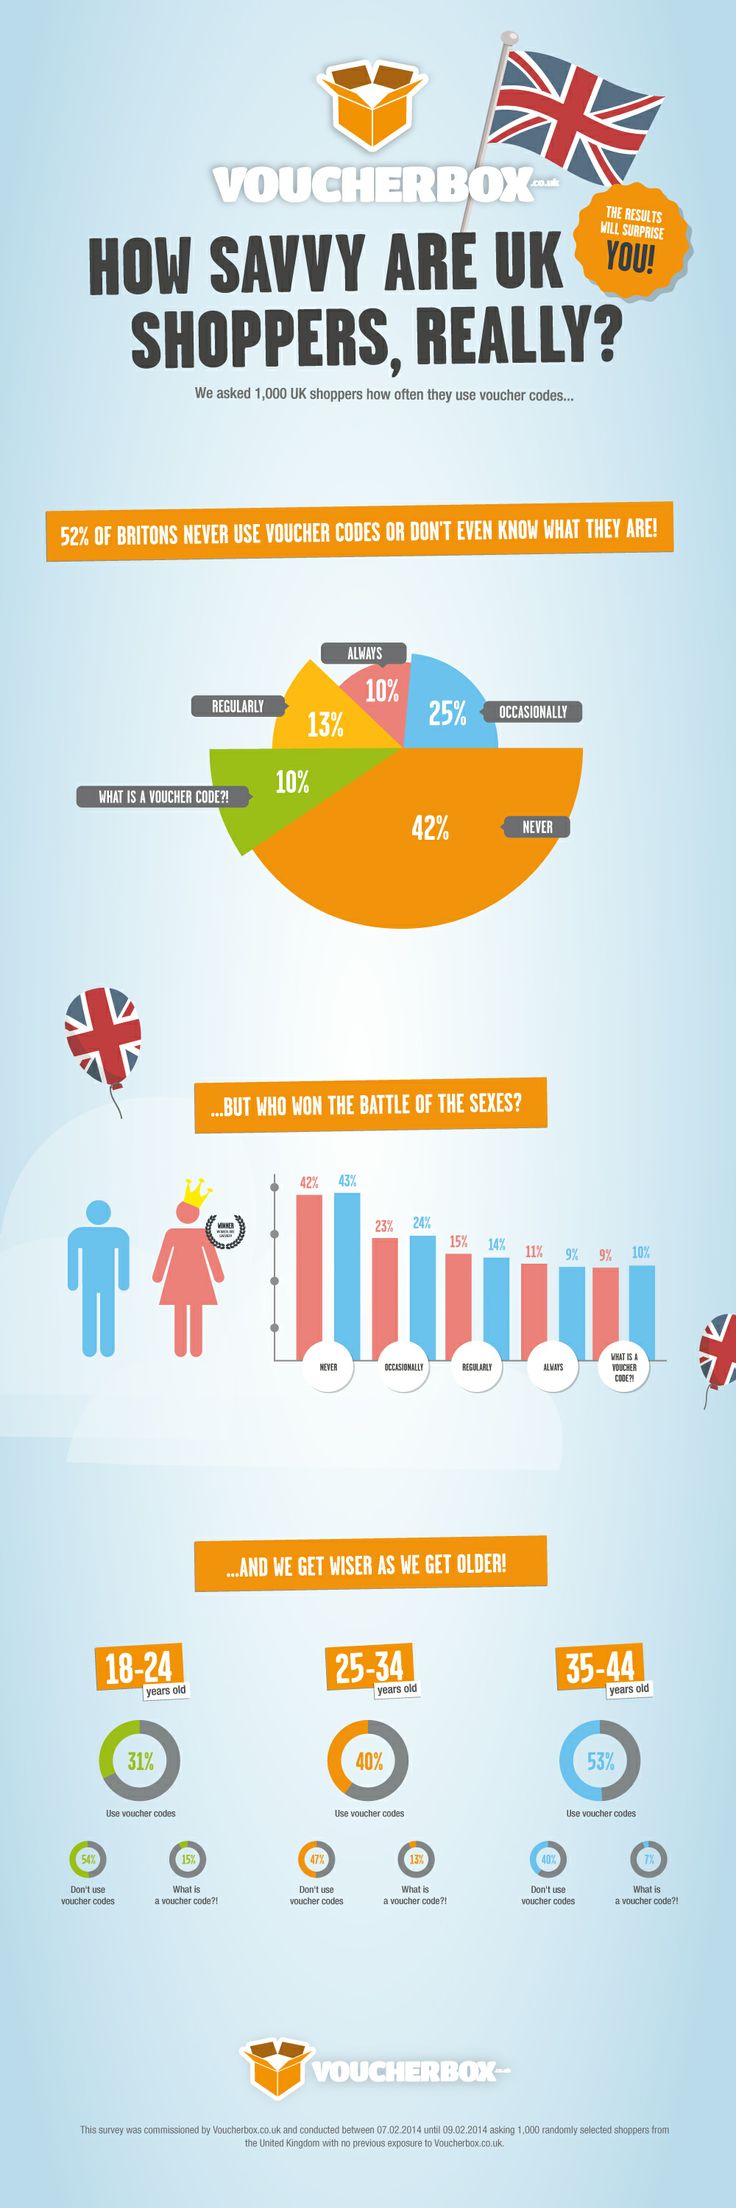 Digital-Marketing-How-Savvy-are-UK-Shoppers-Really-Infographic-UK-Shoppers Digital Marketing : How Savvy are UK Shoppers, Really?   #Infographic #UK #Shoppers